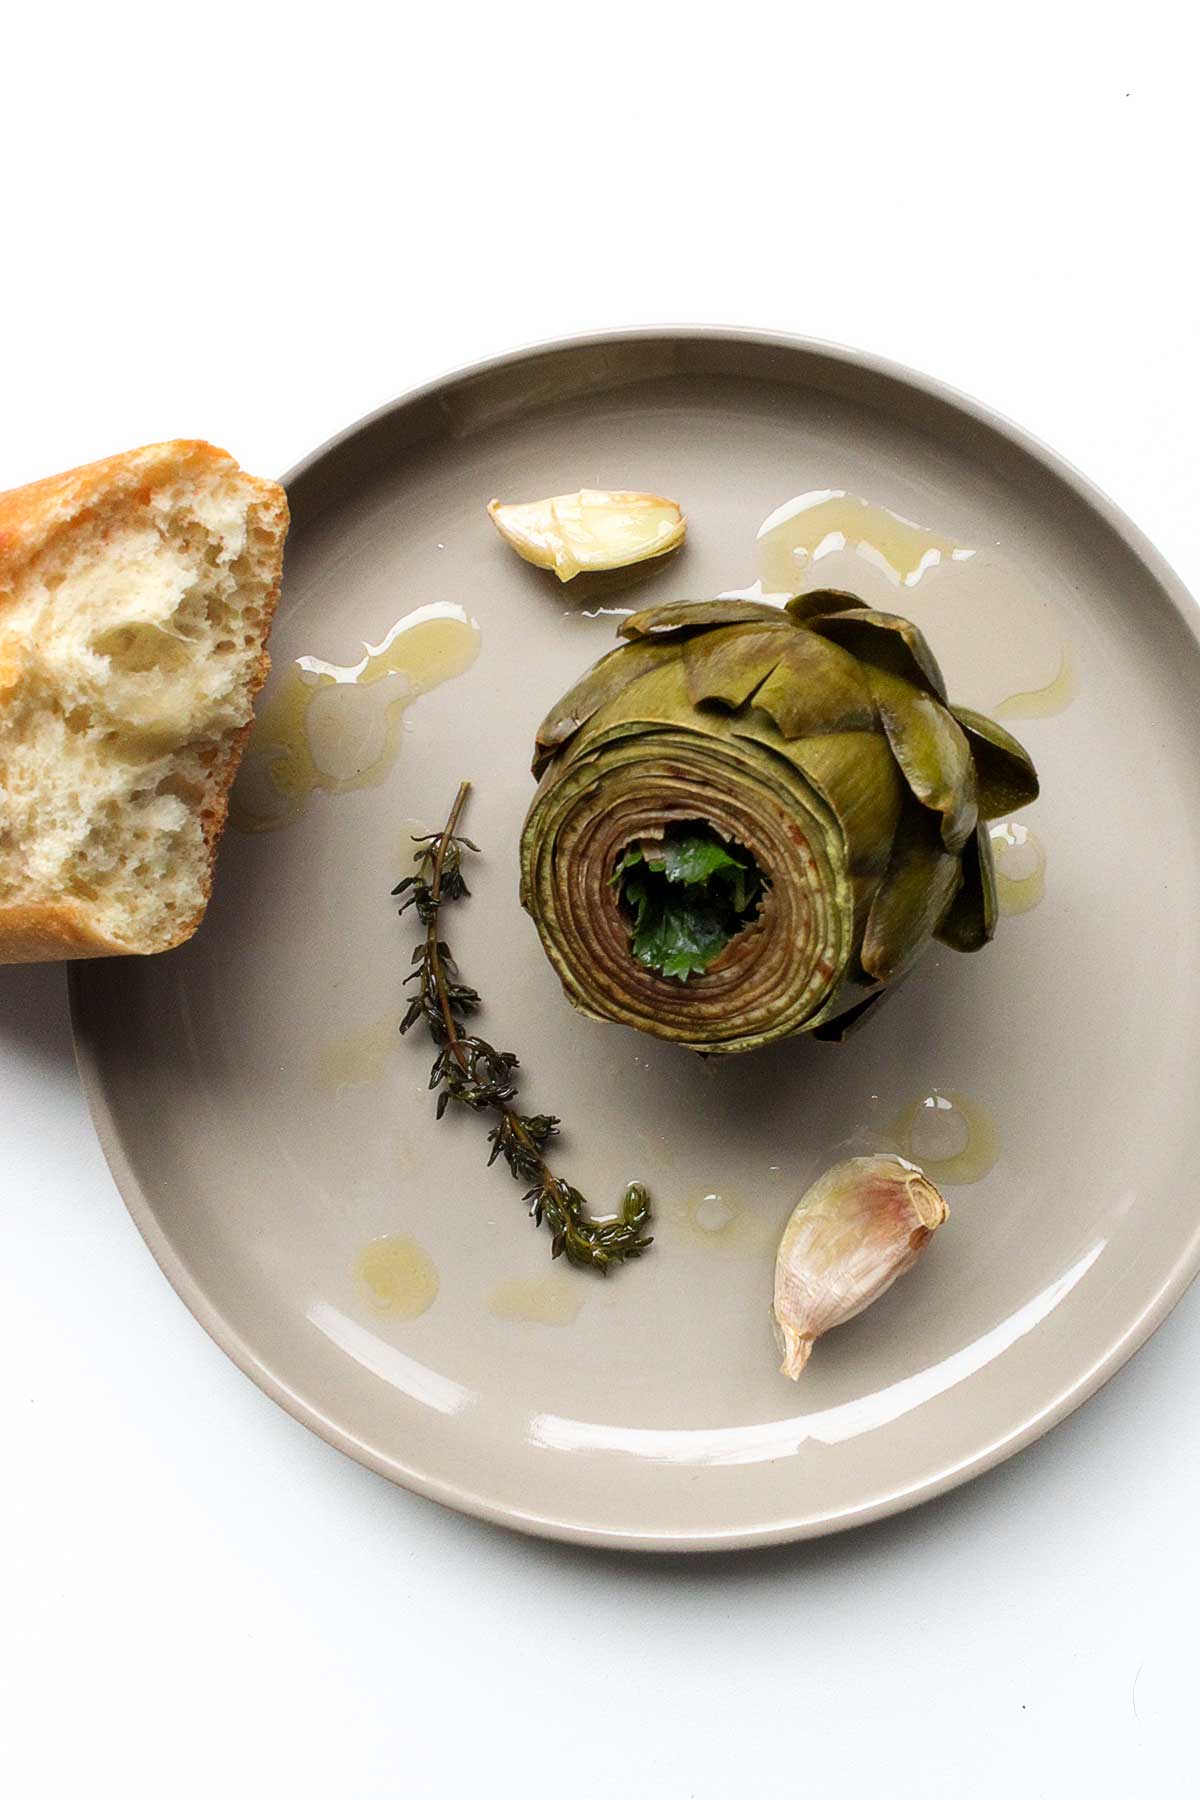 A braised artichoke on a round plate with a couple of garlic cloves, a thyme sprig, and piece of bread on the side.